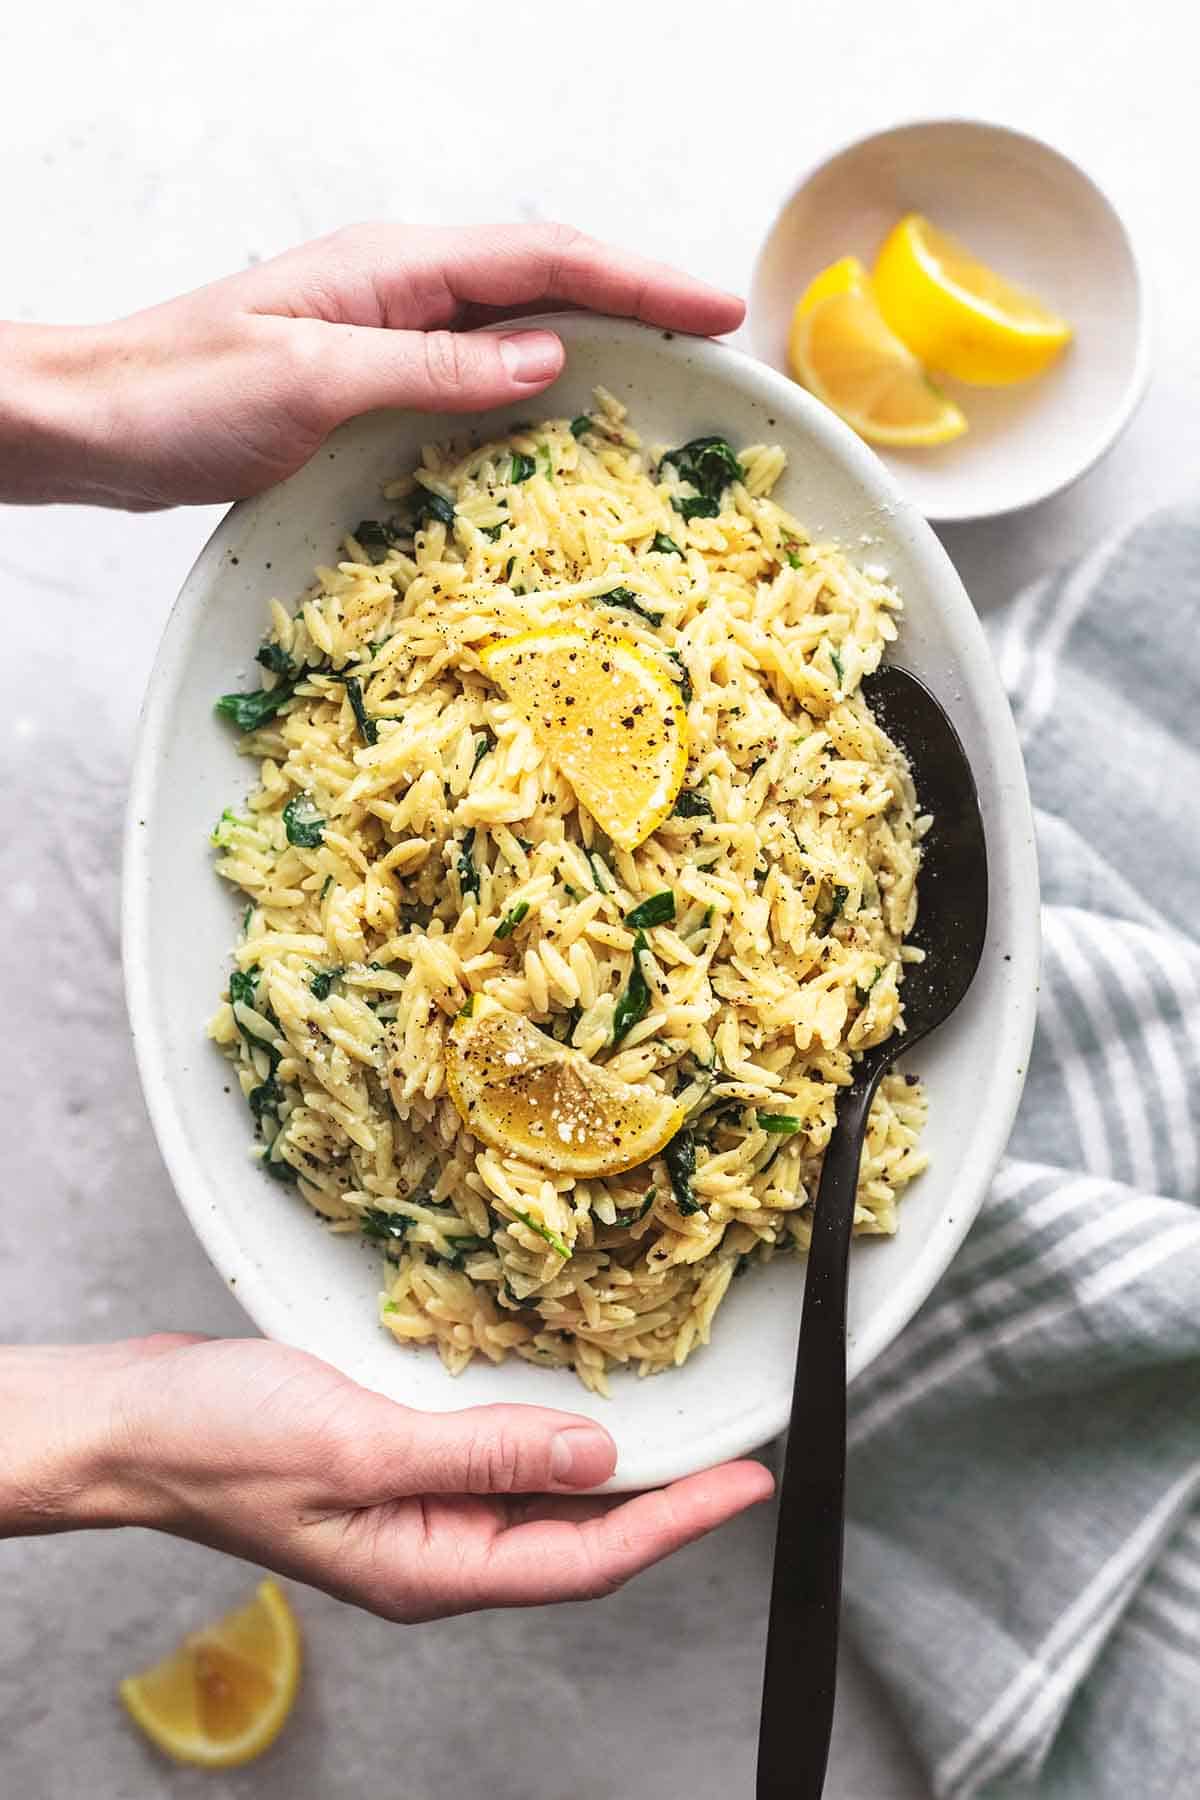 top view of hands holding creamy parmesan spinach orzo on a plate above green striped linen on gray table.